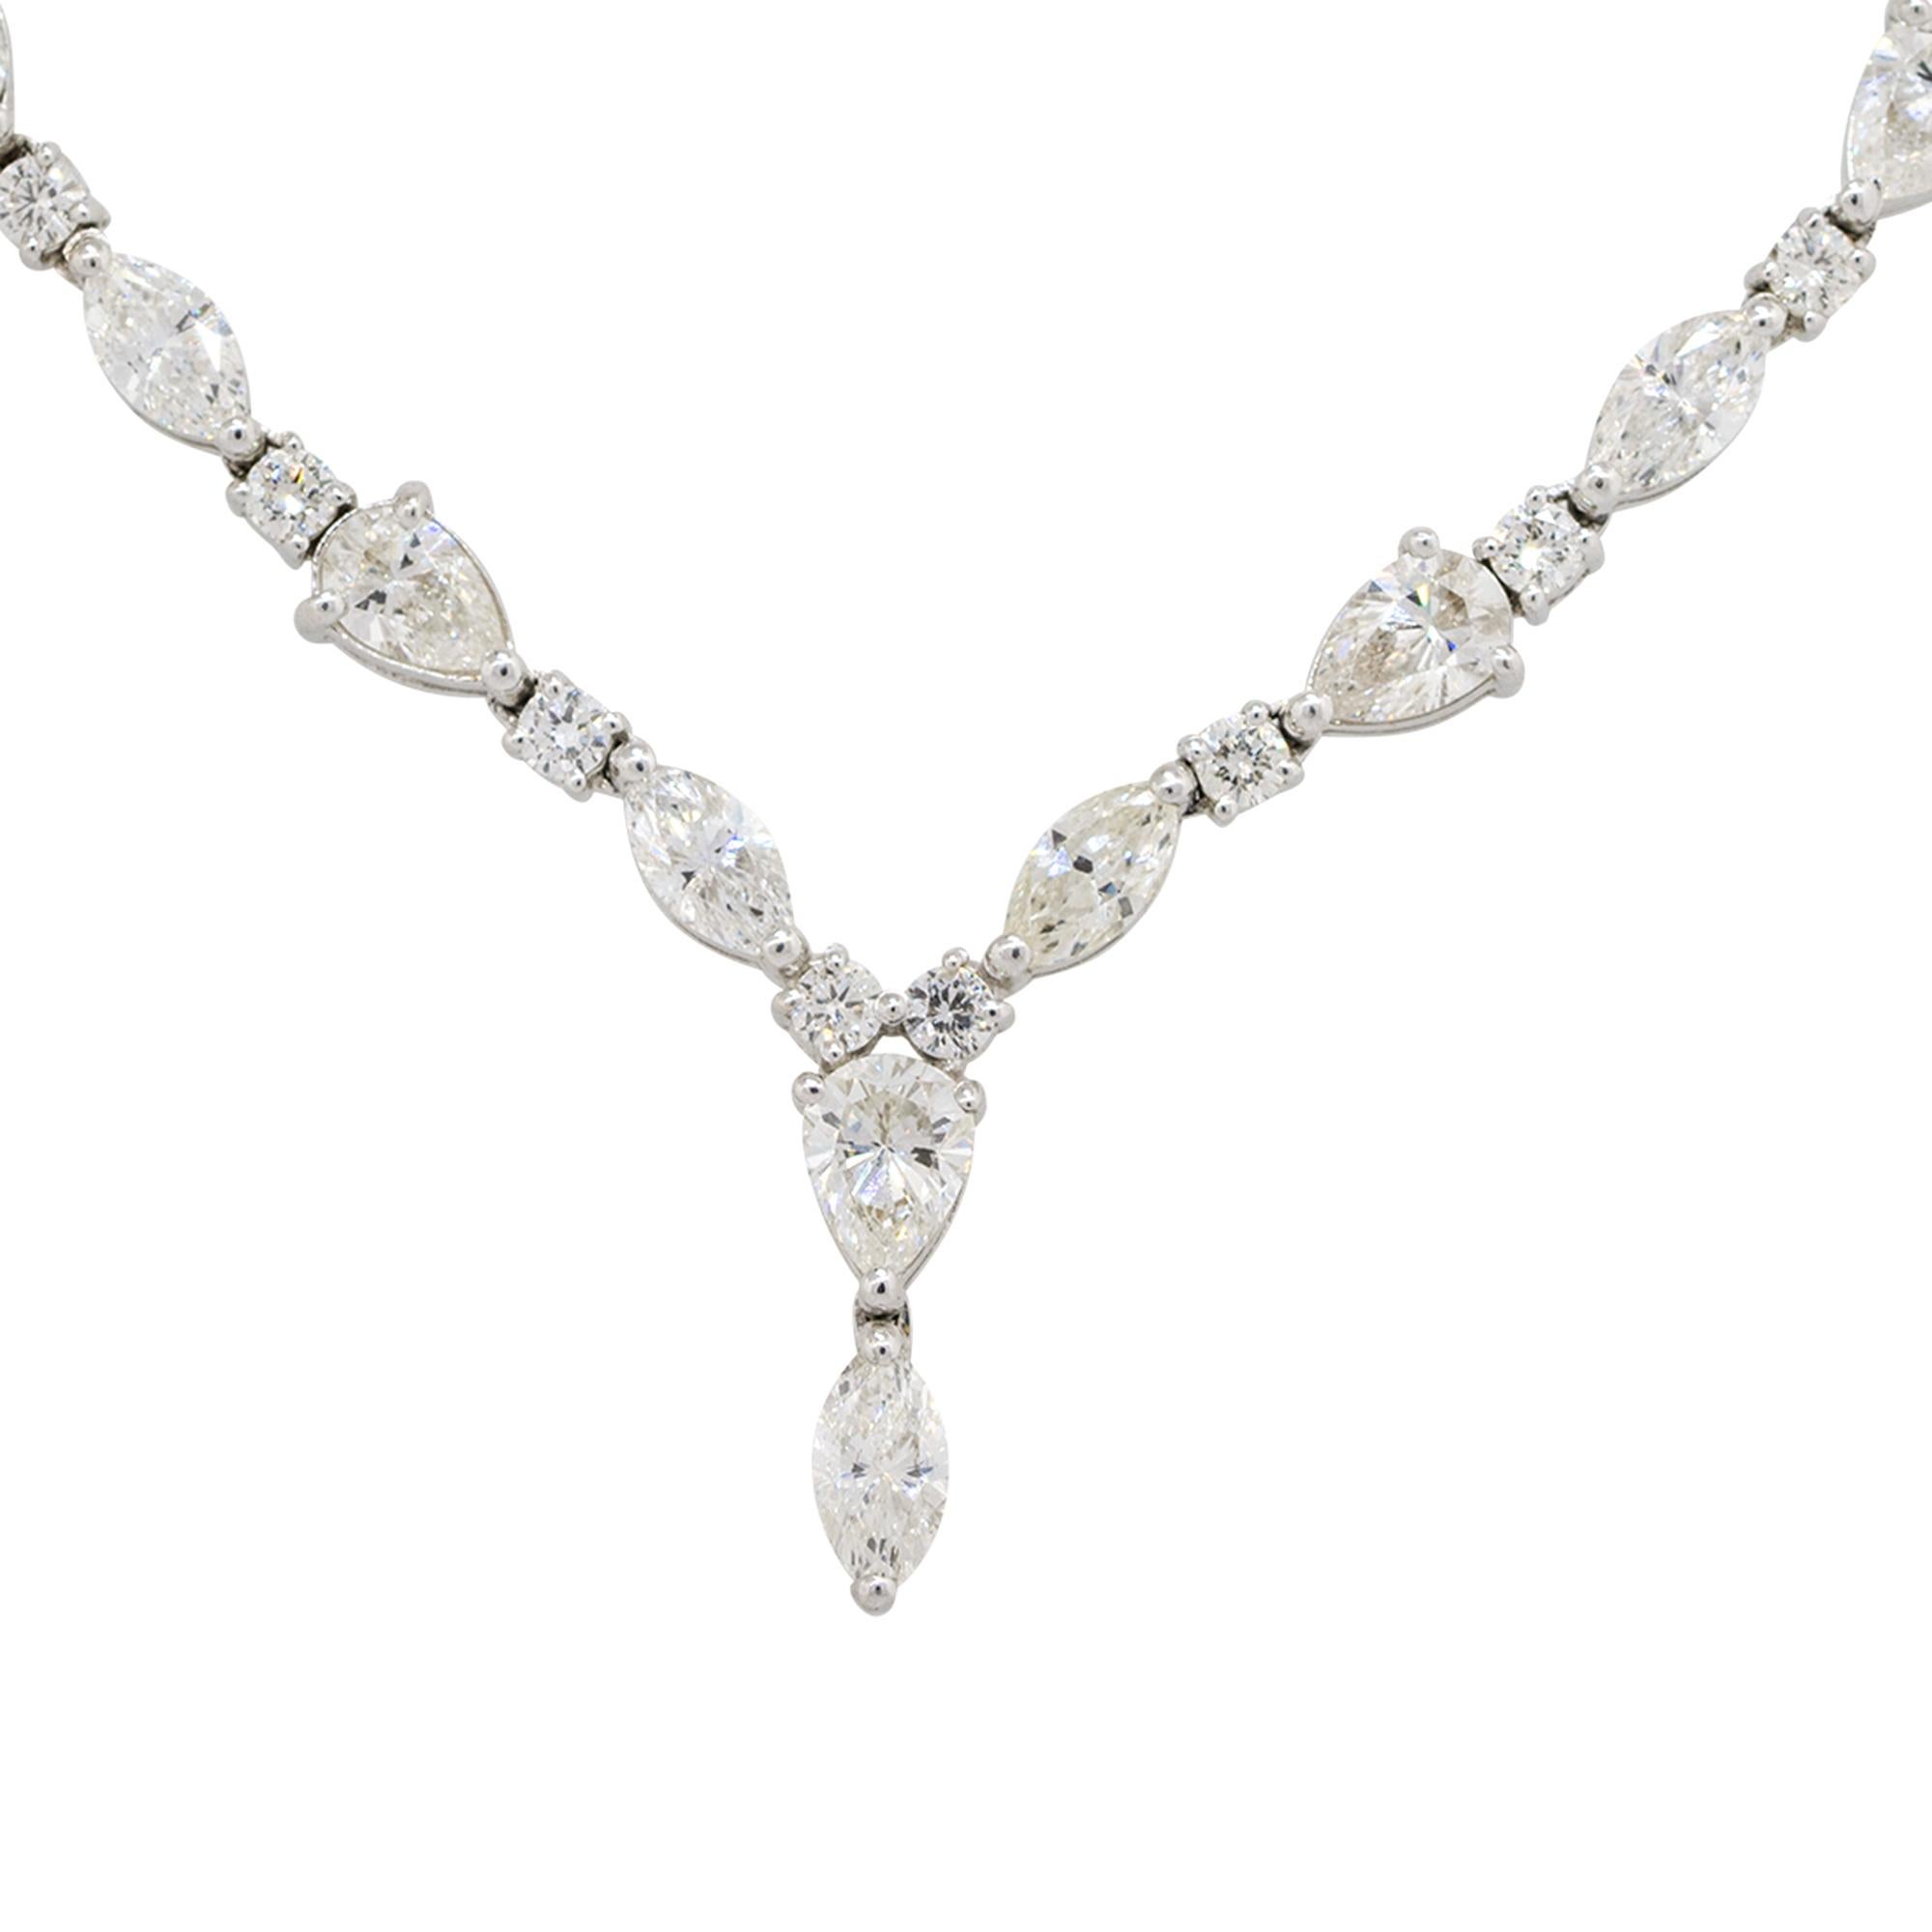  Material: 18k White Gold
Diamond Details: Approx. 14.74ctw of pear, marquise and round cut Diamonds. Diamonds are G/H in color and VS in clarity
Measurements: Necklace measures 18